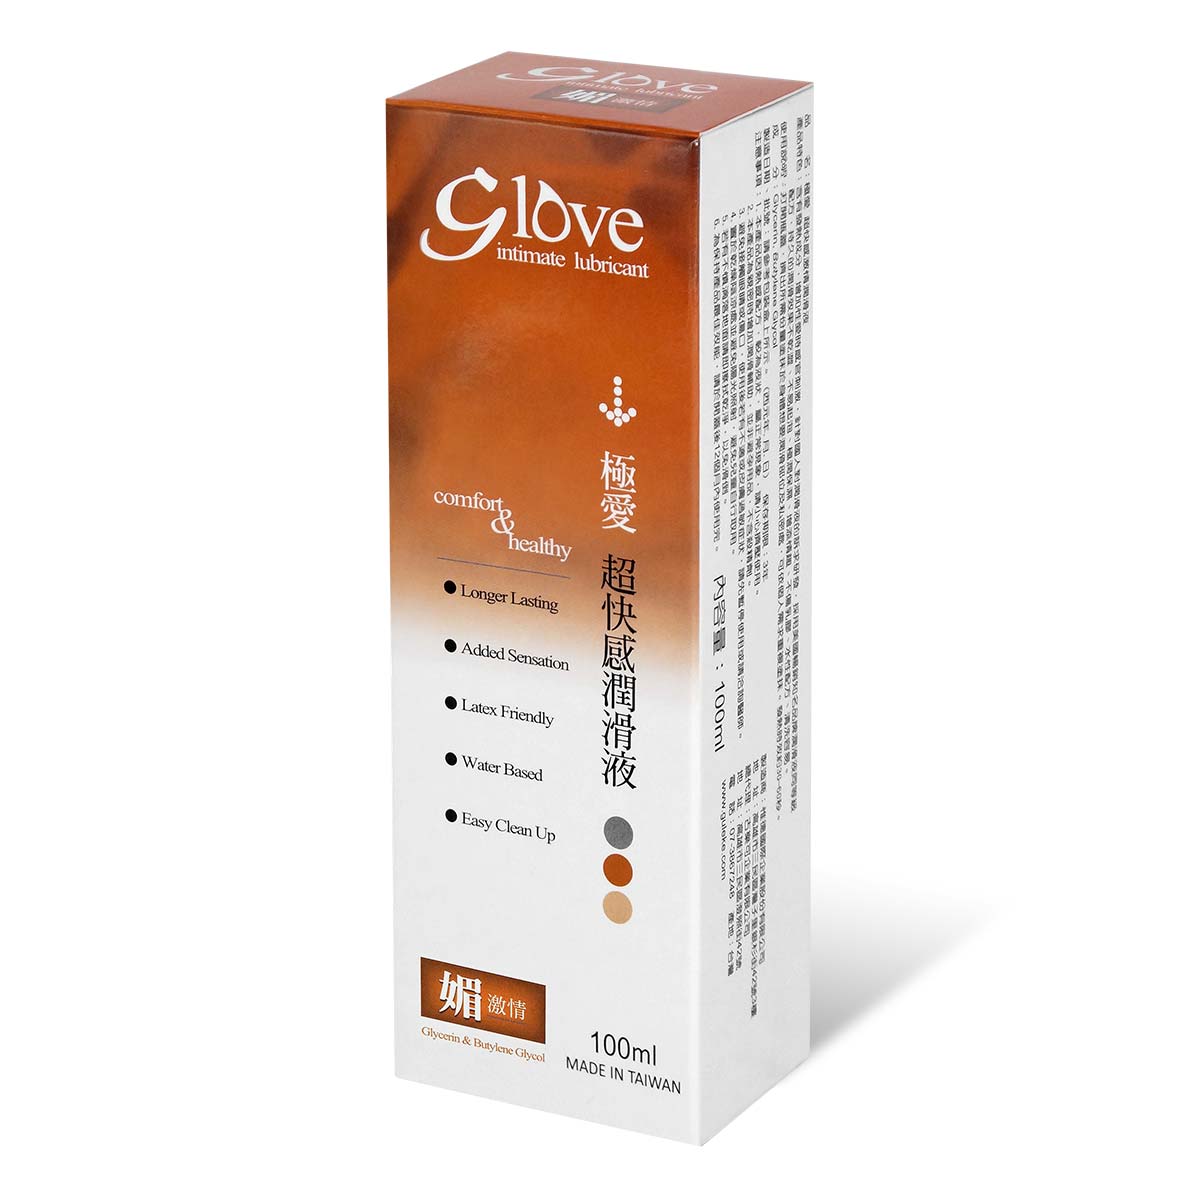 G Love intimate lubricant [Glycerin & Butylene Glycol] 100ml Water-based Lubricant (Short Expiry)-p_1